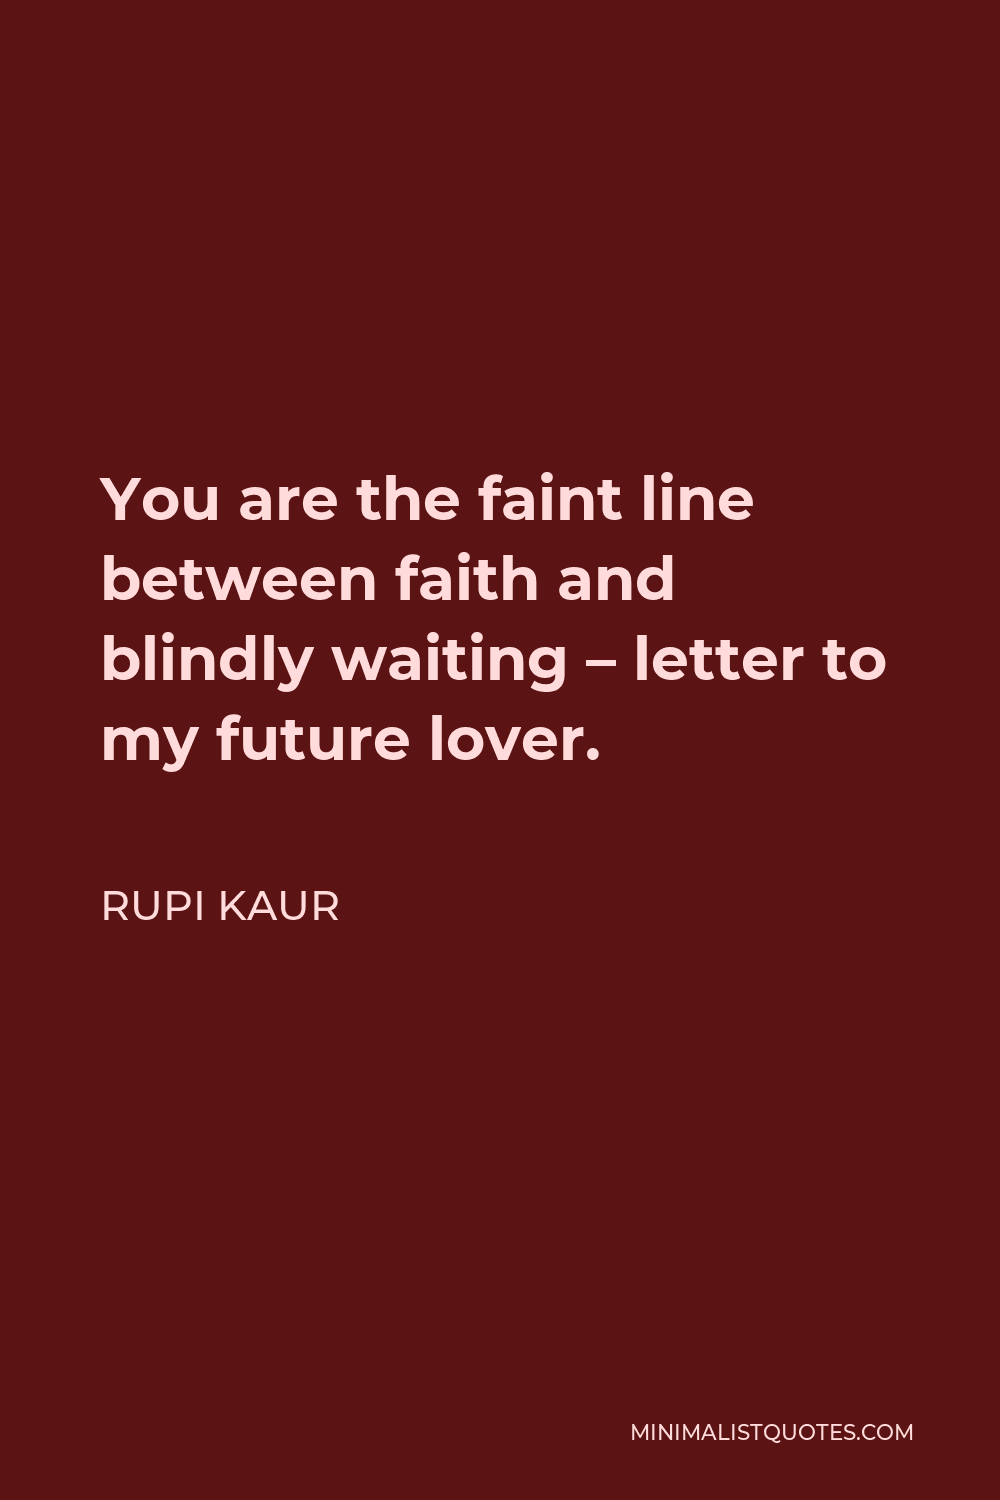 Rupi Kaur Quote - You are the faint line between faith and blindly waiting – letter to my future lover.